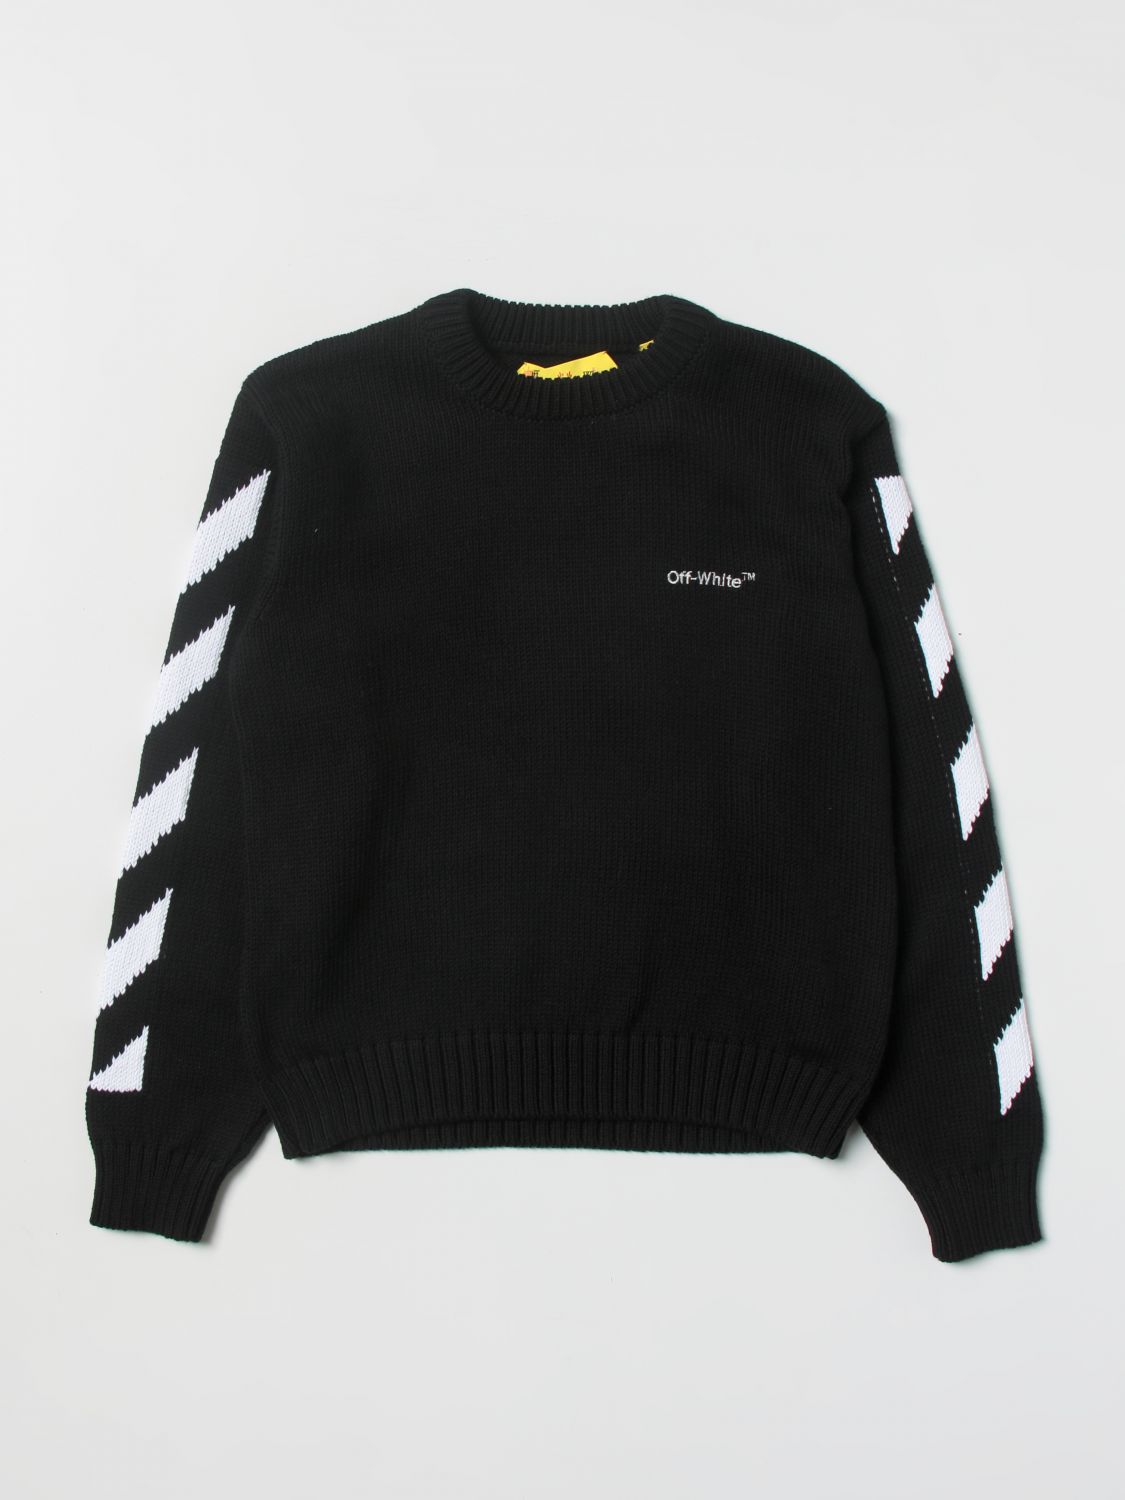 Off-White sweater for boys